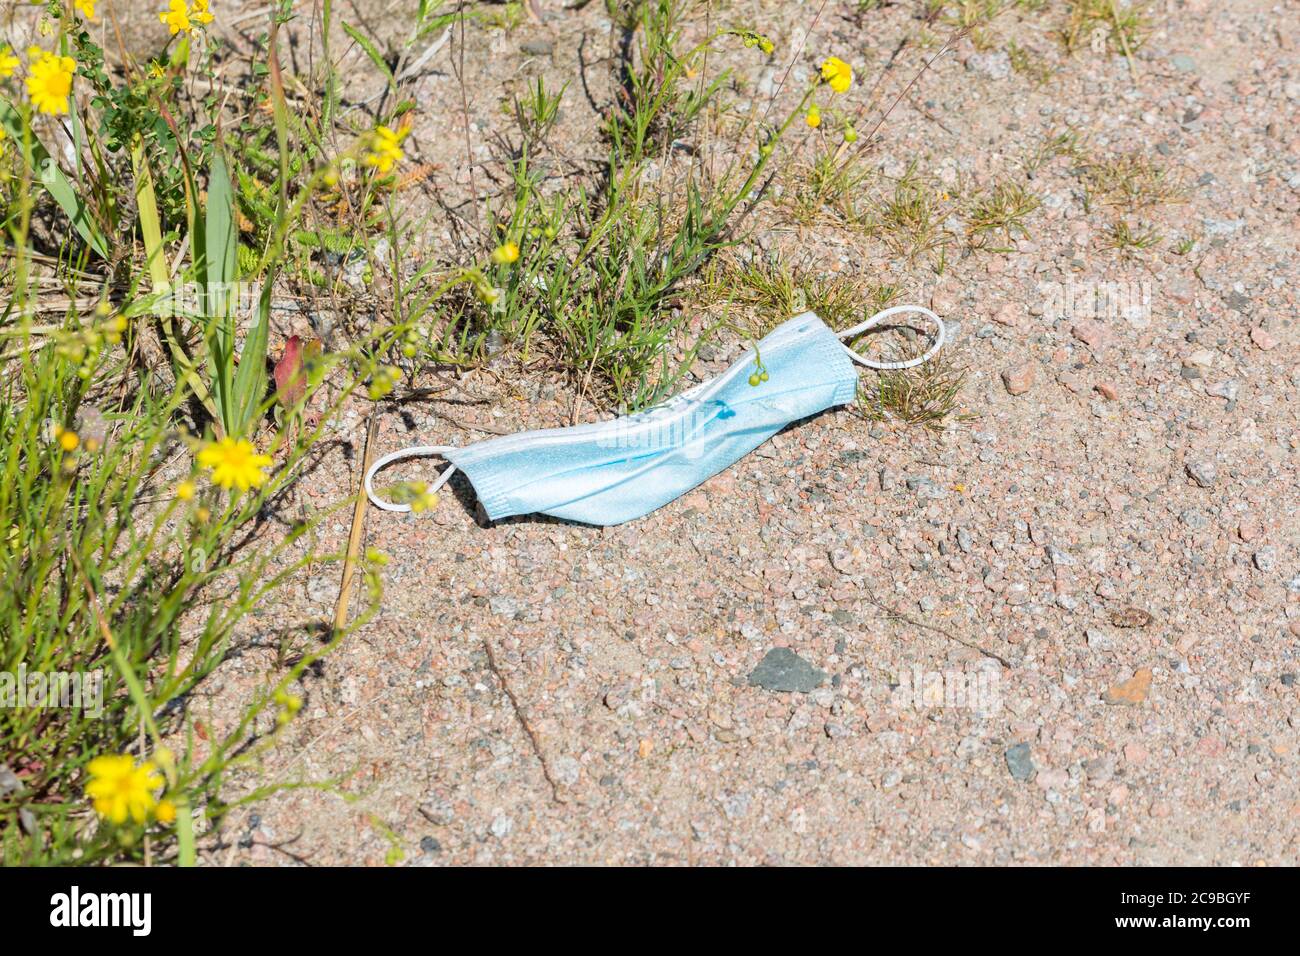 Hamburg, Germany - June 22, 2020: Used, blue face mask lying on the ground. Sandy soil with pebbles and grass. Stock Photo